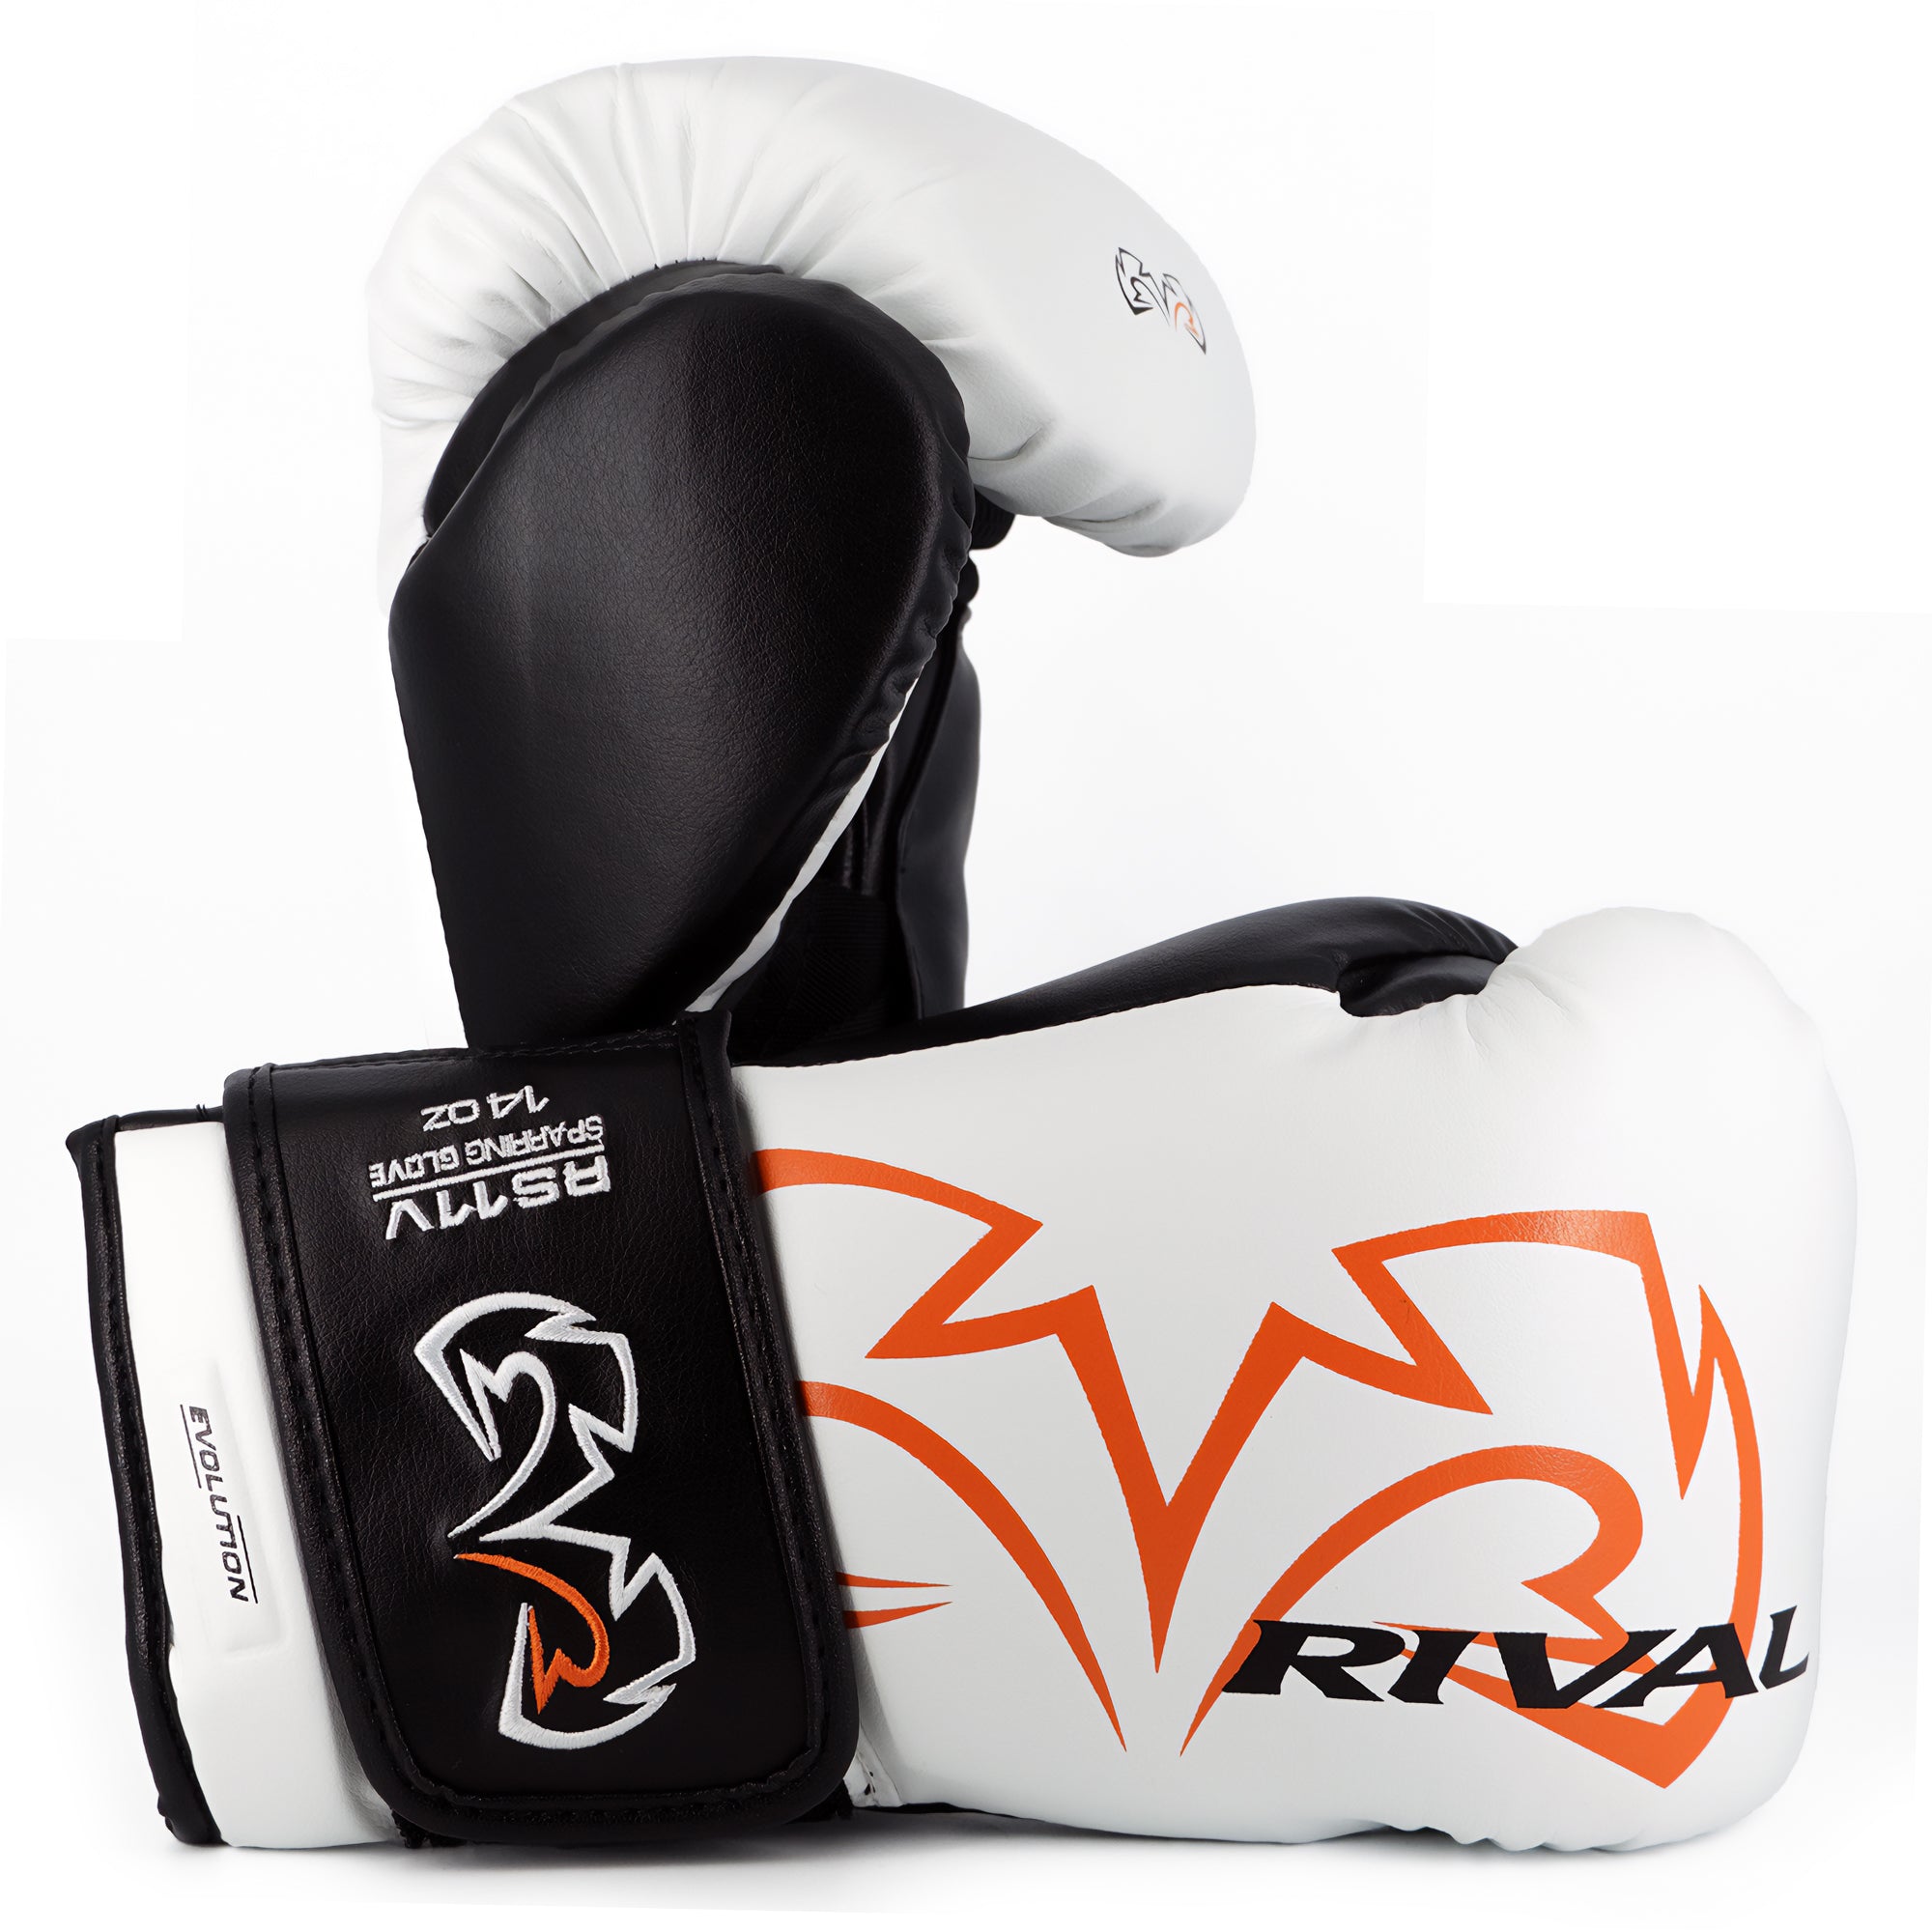 RIVAL Boxing RS11V Evolution Hook and Loop Sparring Gloves RIVAL